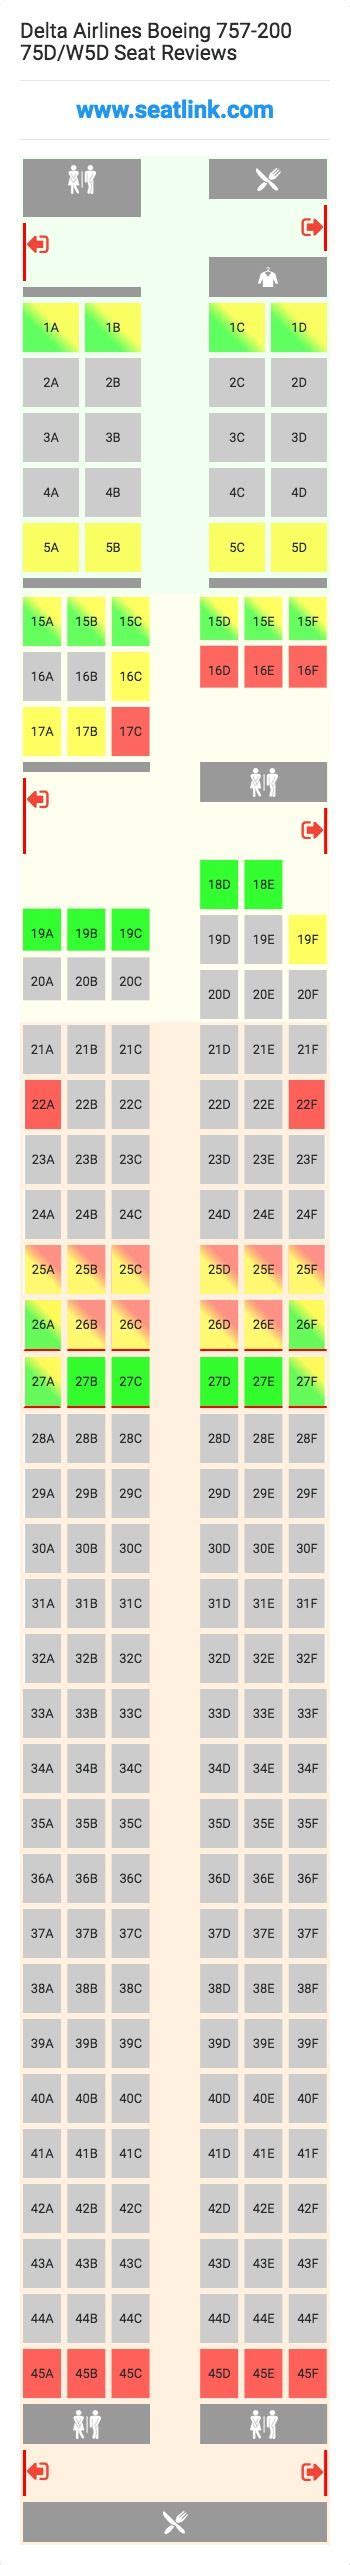 Delta Airlines Boeing 757 200 75dw5d 752 Seat Map Delta Airlines